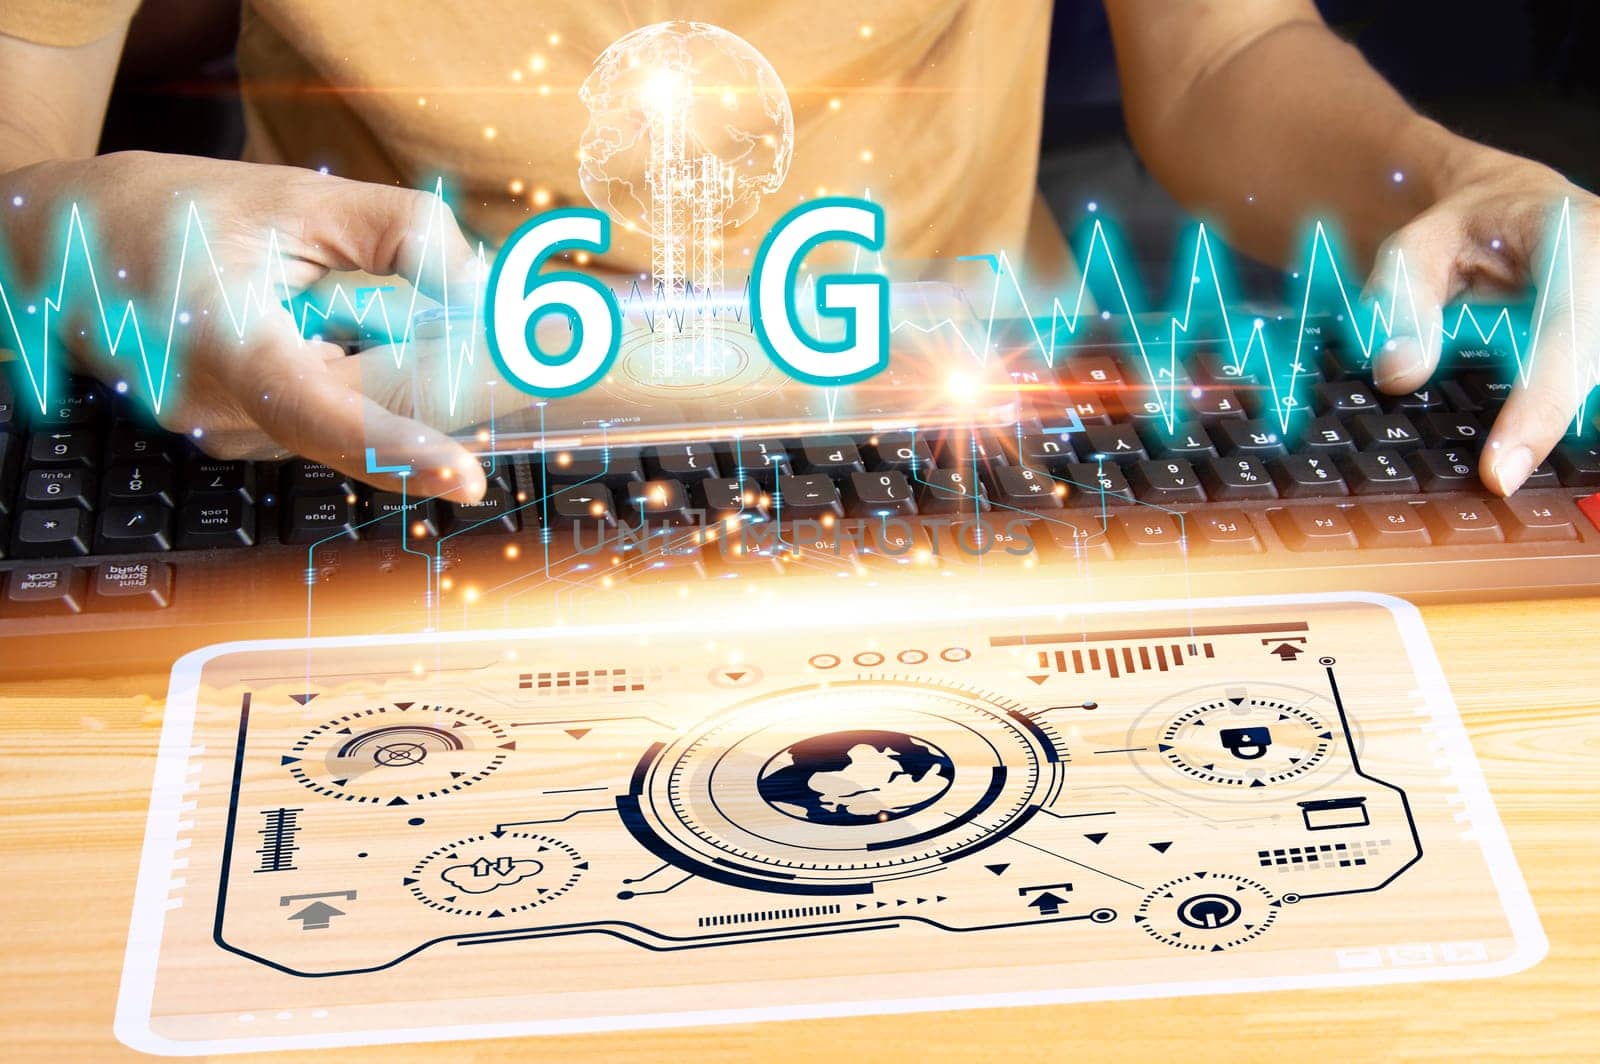 6G network concept, high speed mobile internet New age network, business concept, modern technology internet and network